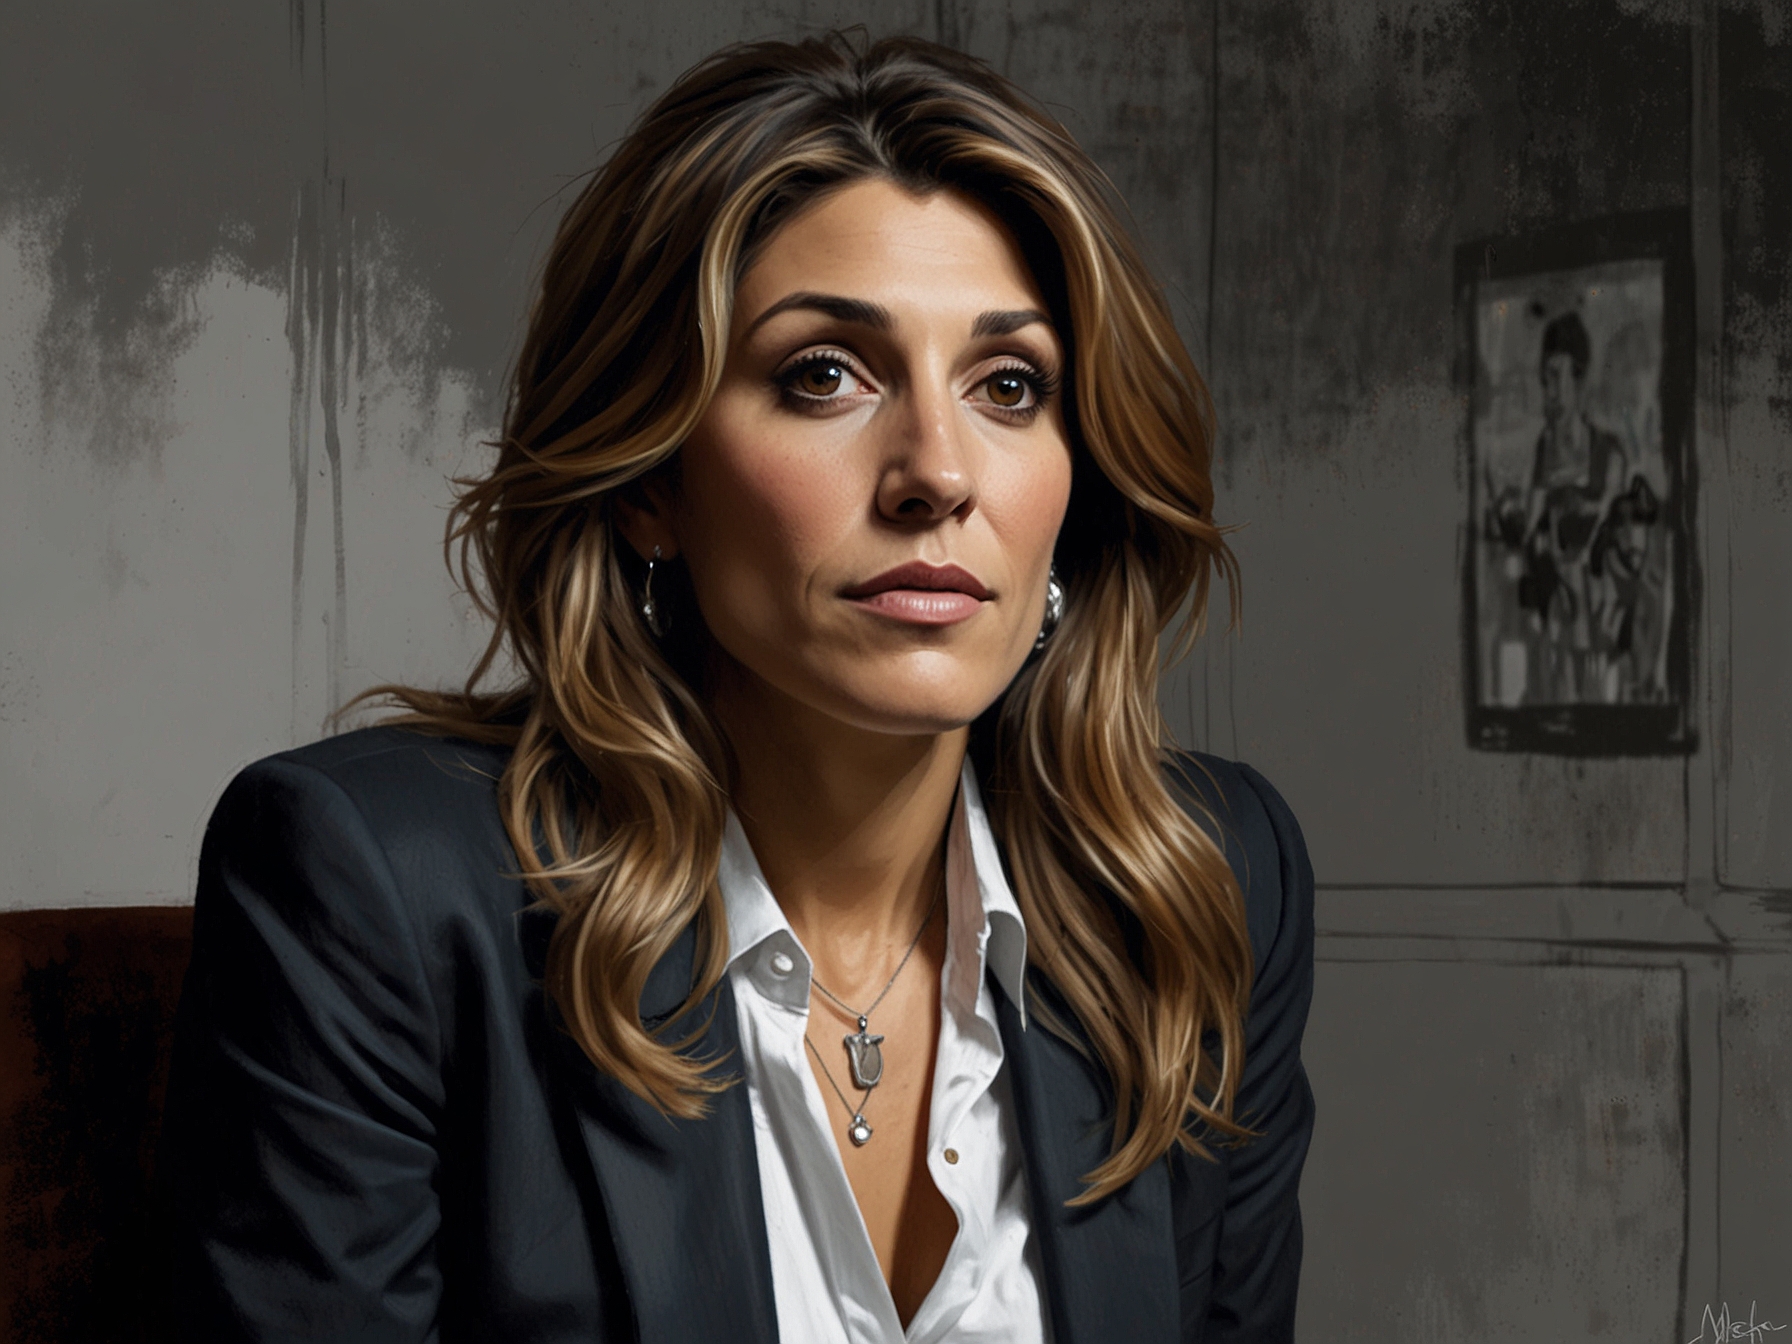 Jennifer Esposito speaks passionately during an interview, reflecting on her harrowing past and the unfair treatment she faced from a powerful producer early in her career.